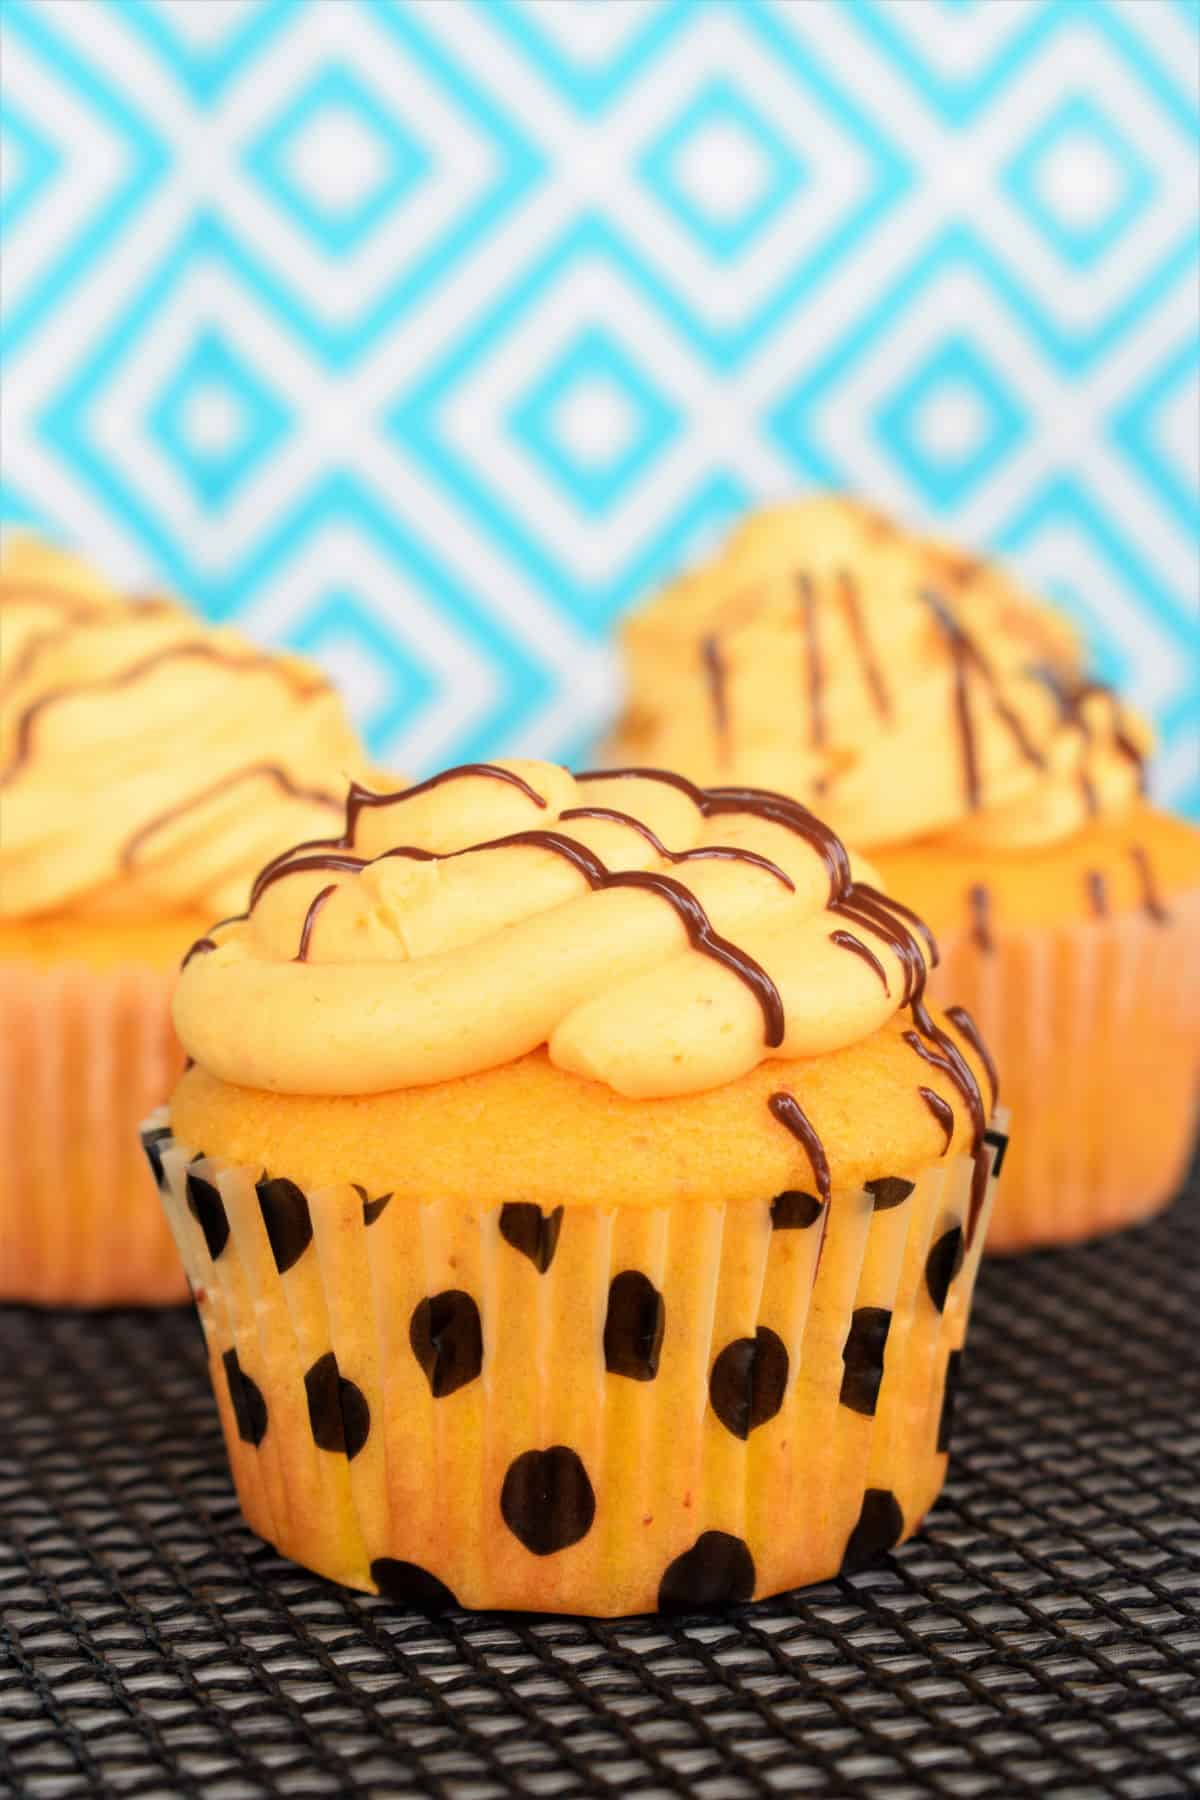 Pumpkin cupcakes with chocolate drizzle on turquoise patterned background.